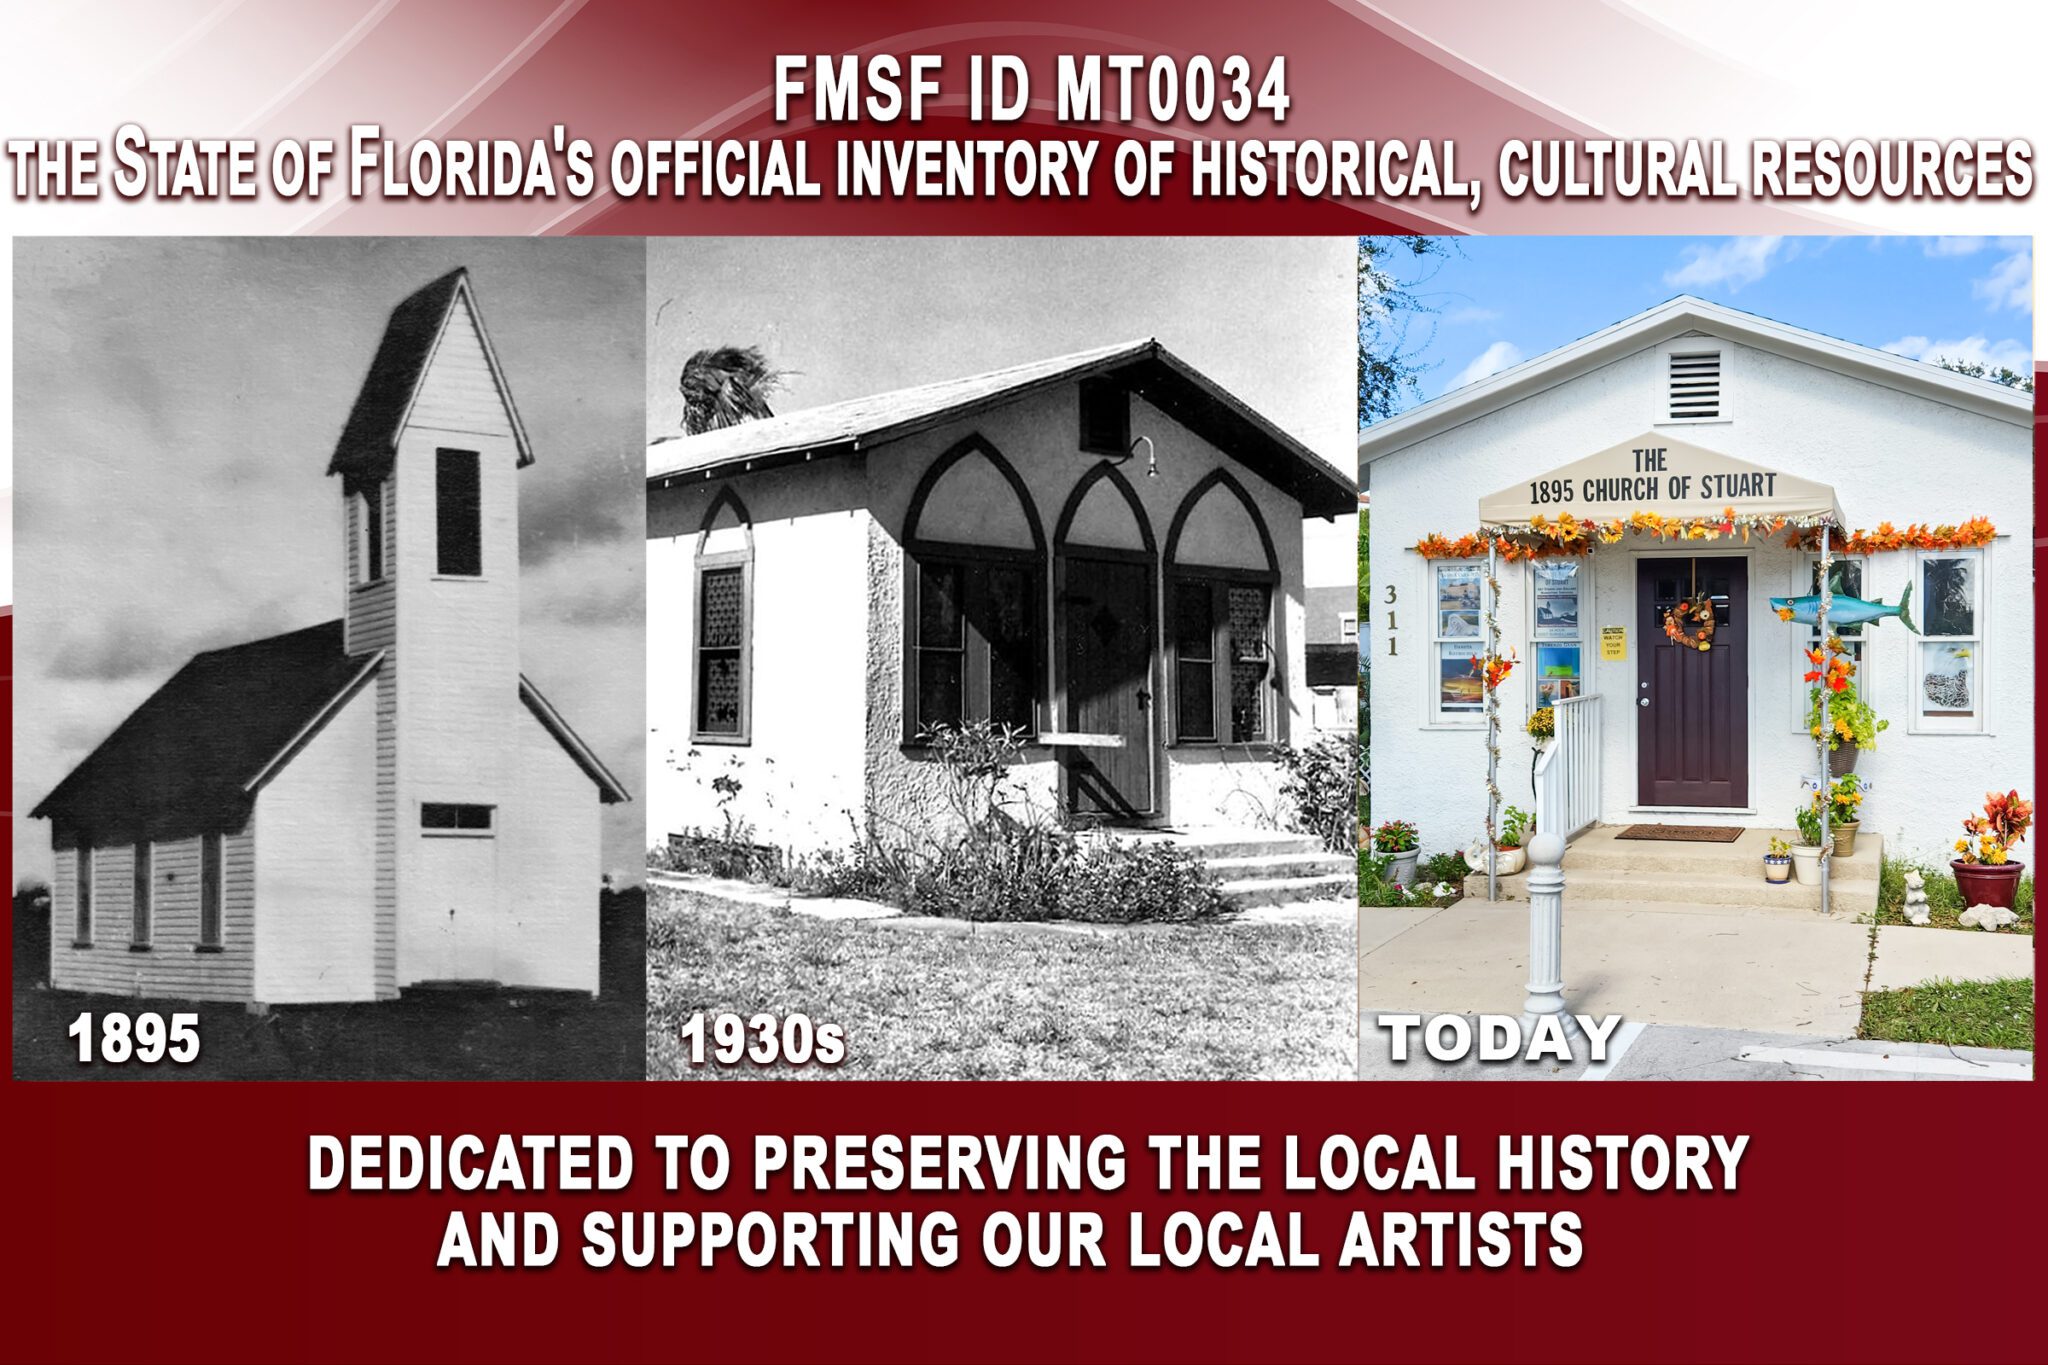 The oldest building in Martin County: The first community church built in Stuart in 1895. The 1895 Church of Stuart - historic building in Downtown Stuart, Martin County, Florida; art studio and gallery on the Treasure Coast. Supporting our local artists and the community's heritage.